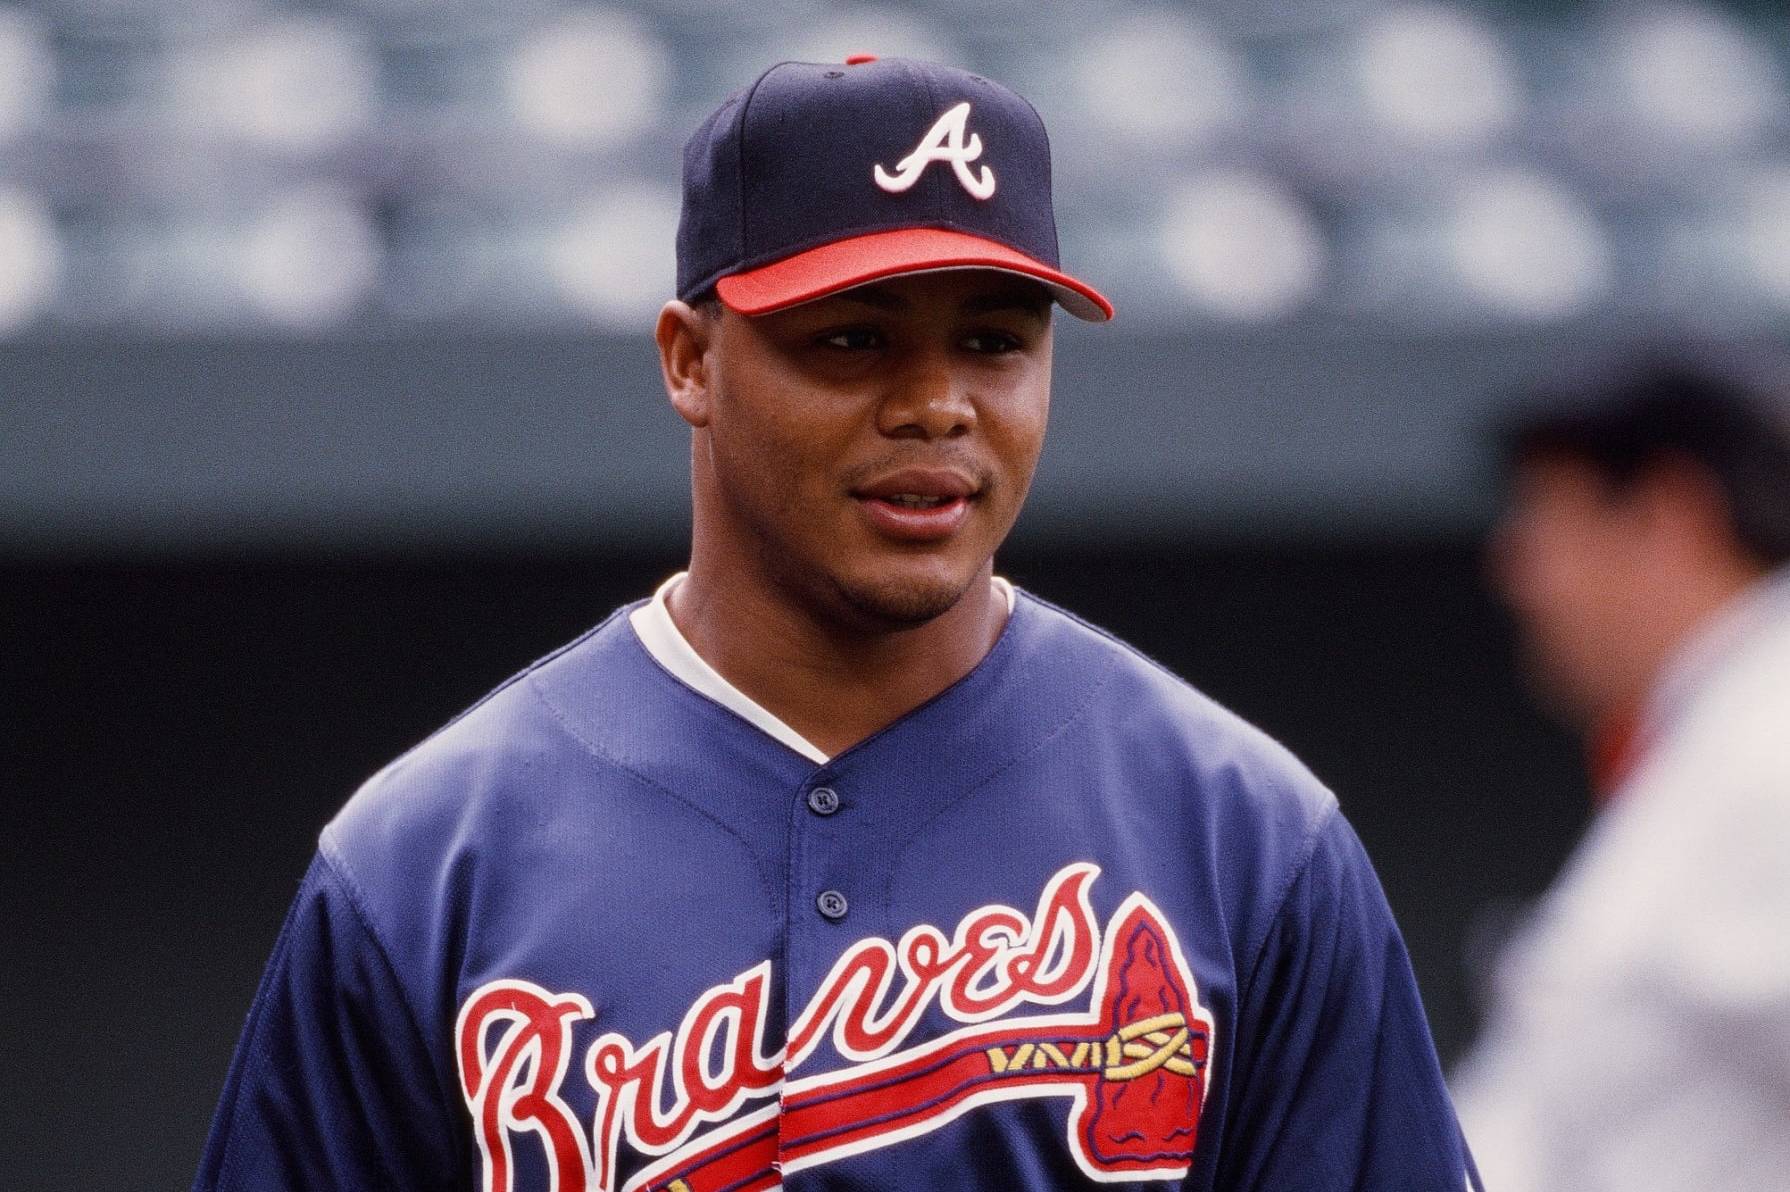 What Pros Wear: What Pros Wear: Andruw Jones, One of MLB's All